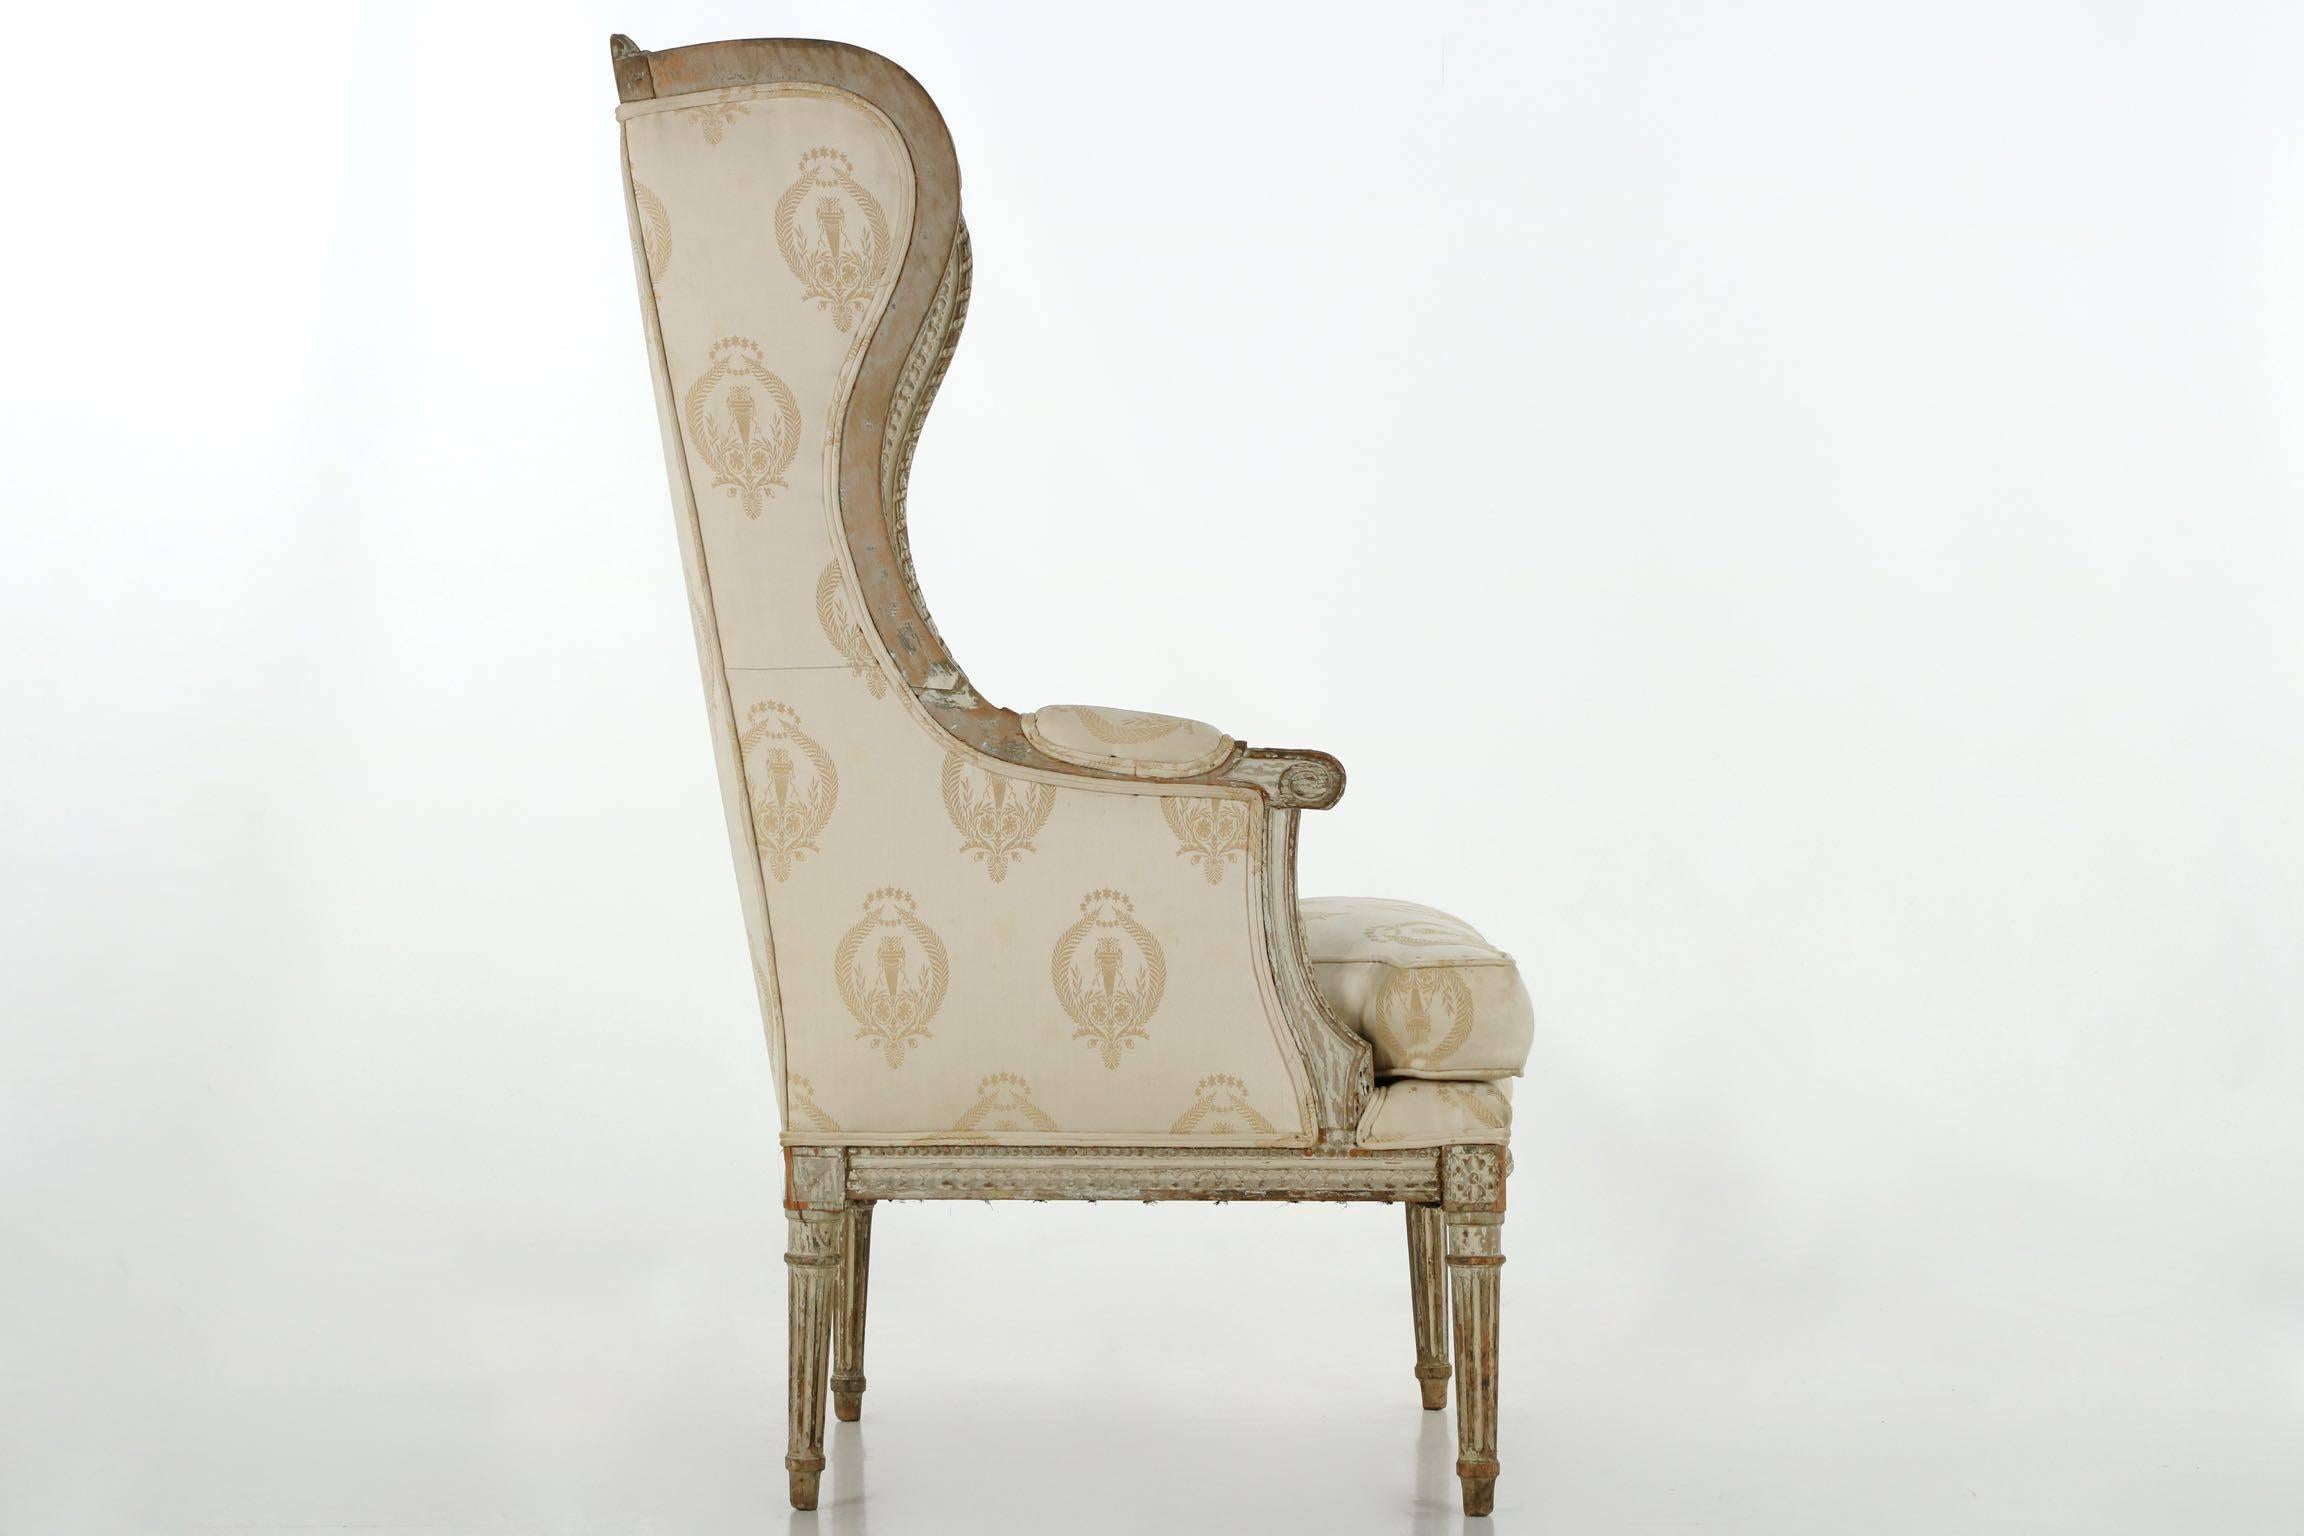 Hand-Carved French Louis XVI Distressed Painted Antique Wingback Armchair, 19th Century